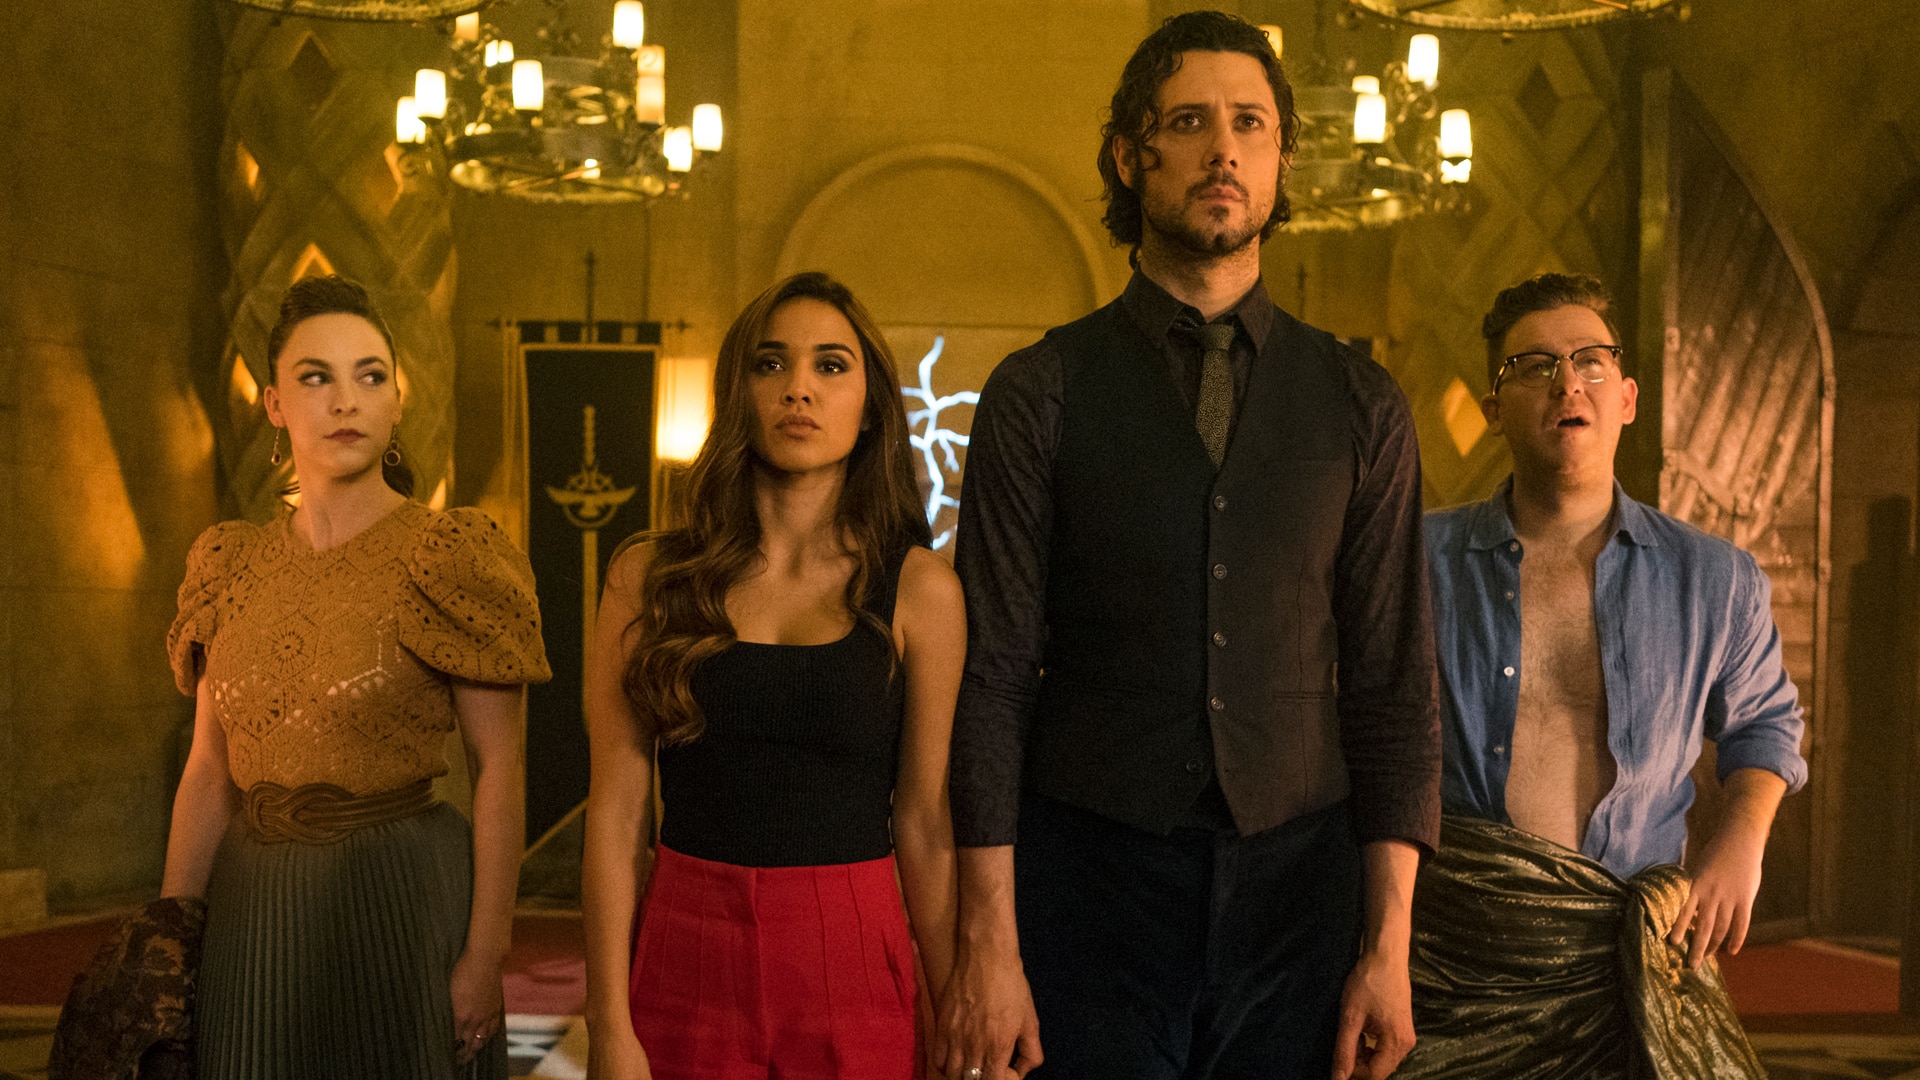 Watch Be the Hyman (Season 5, Episode 11) of The Magicians or get episode d...